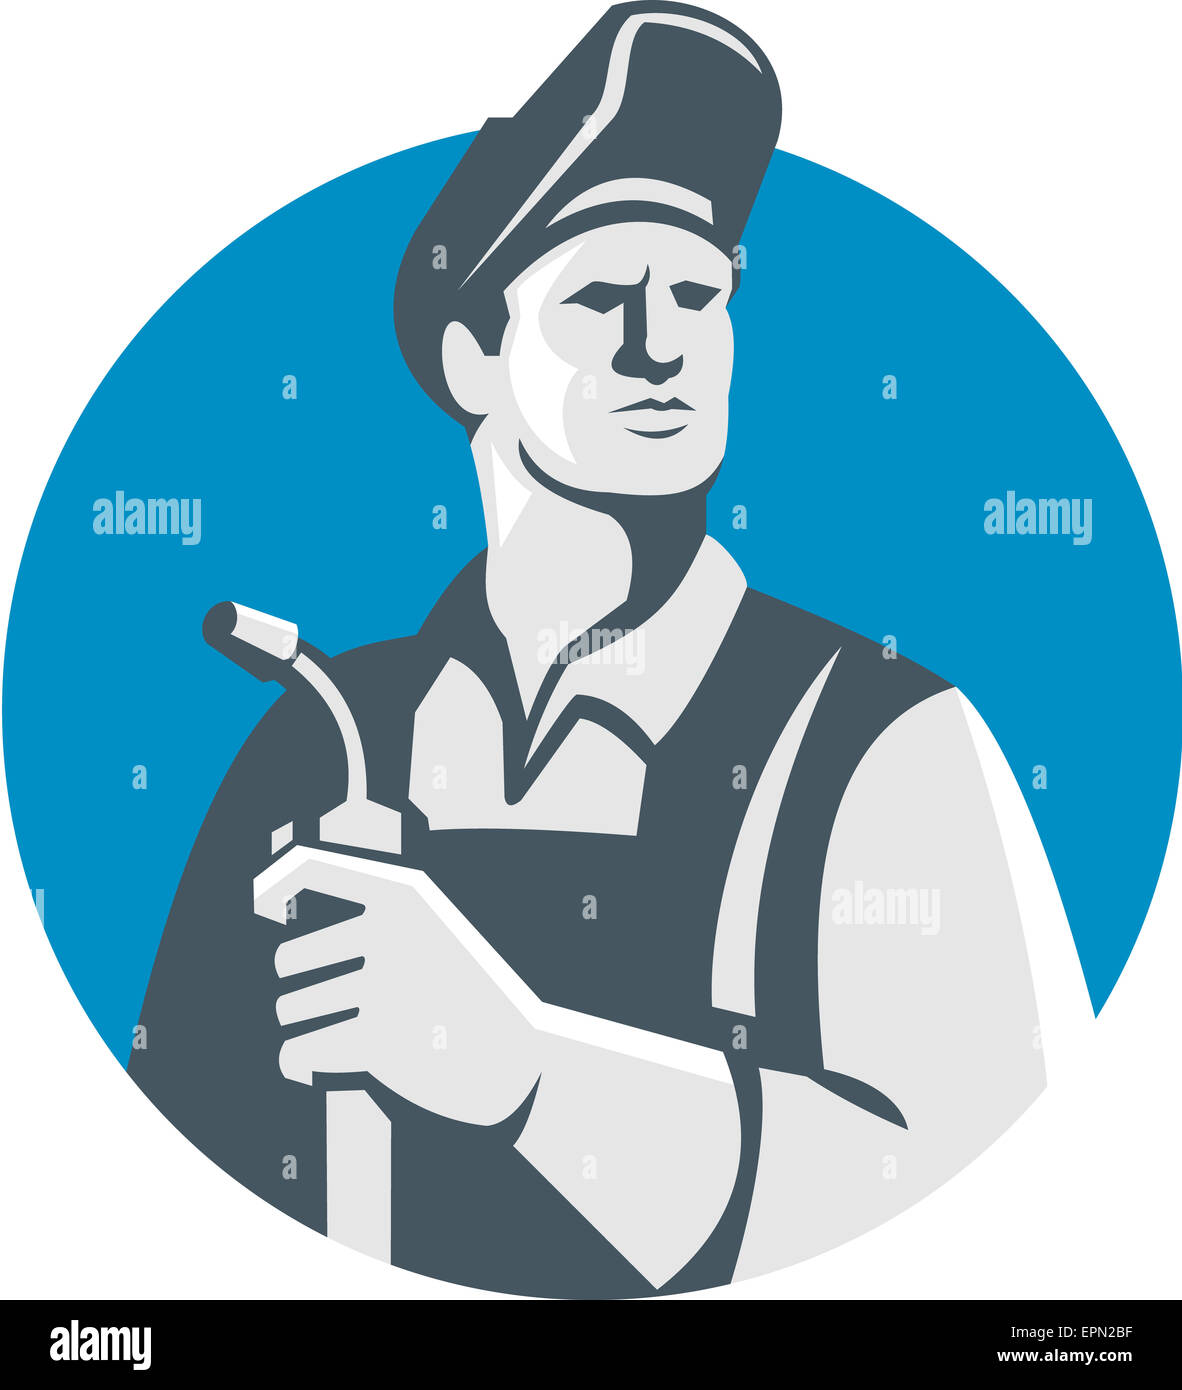 Illustration of welder worker wearing hat holding welding torch looking to the side set inside circle on isolated background done in retro style. Stock Photo